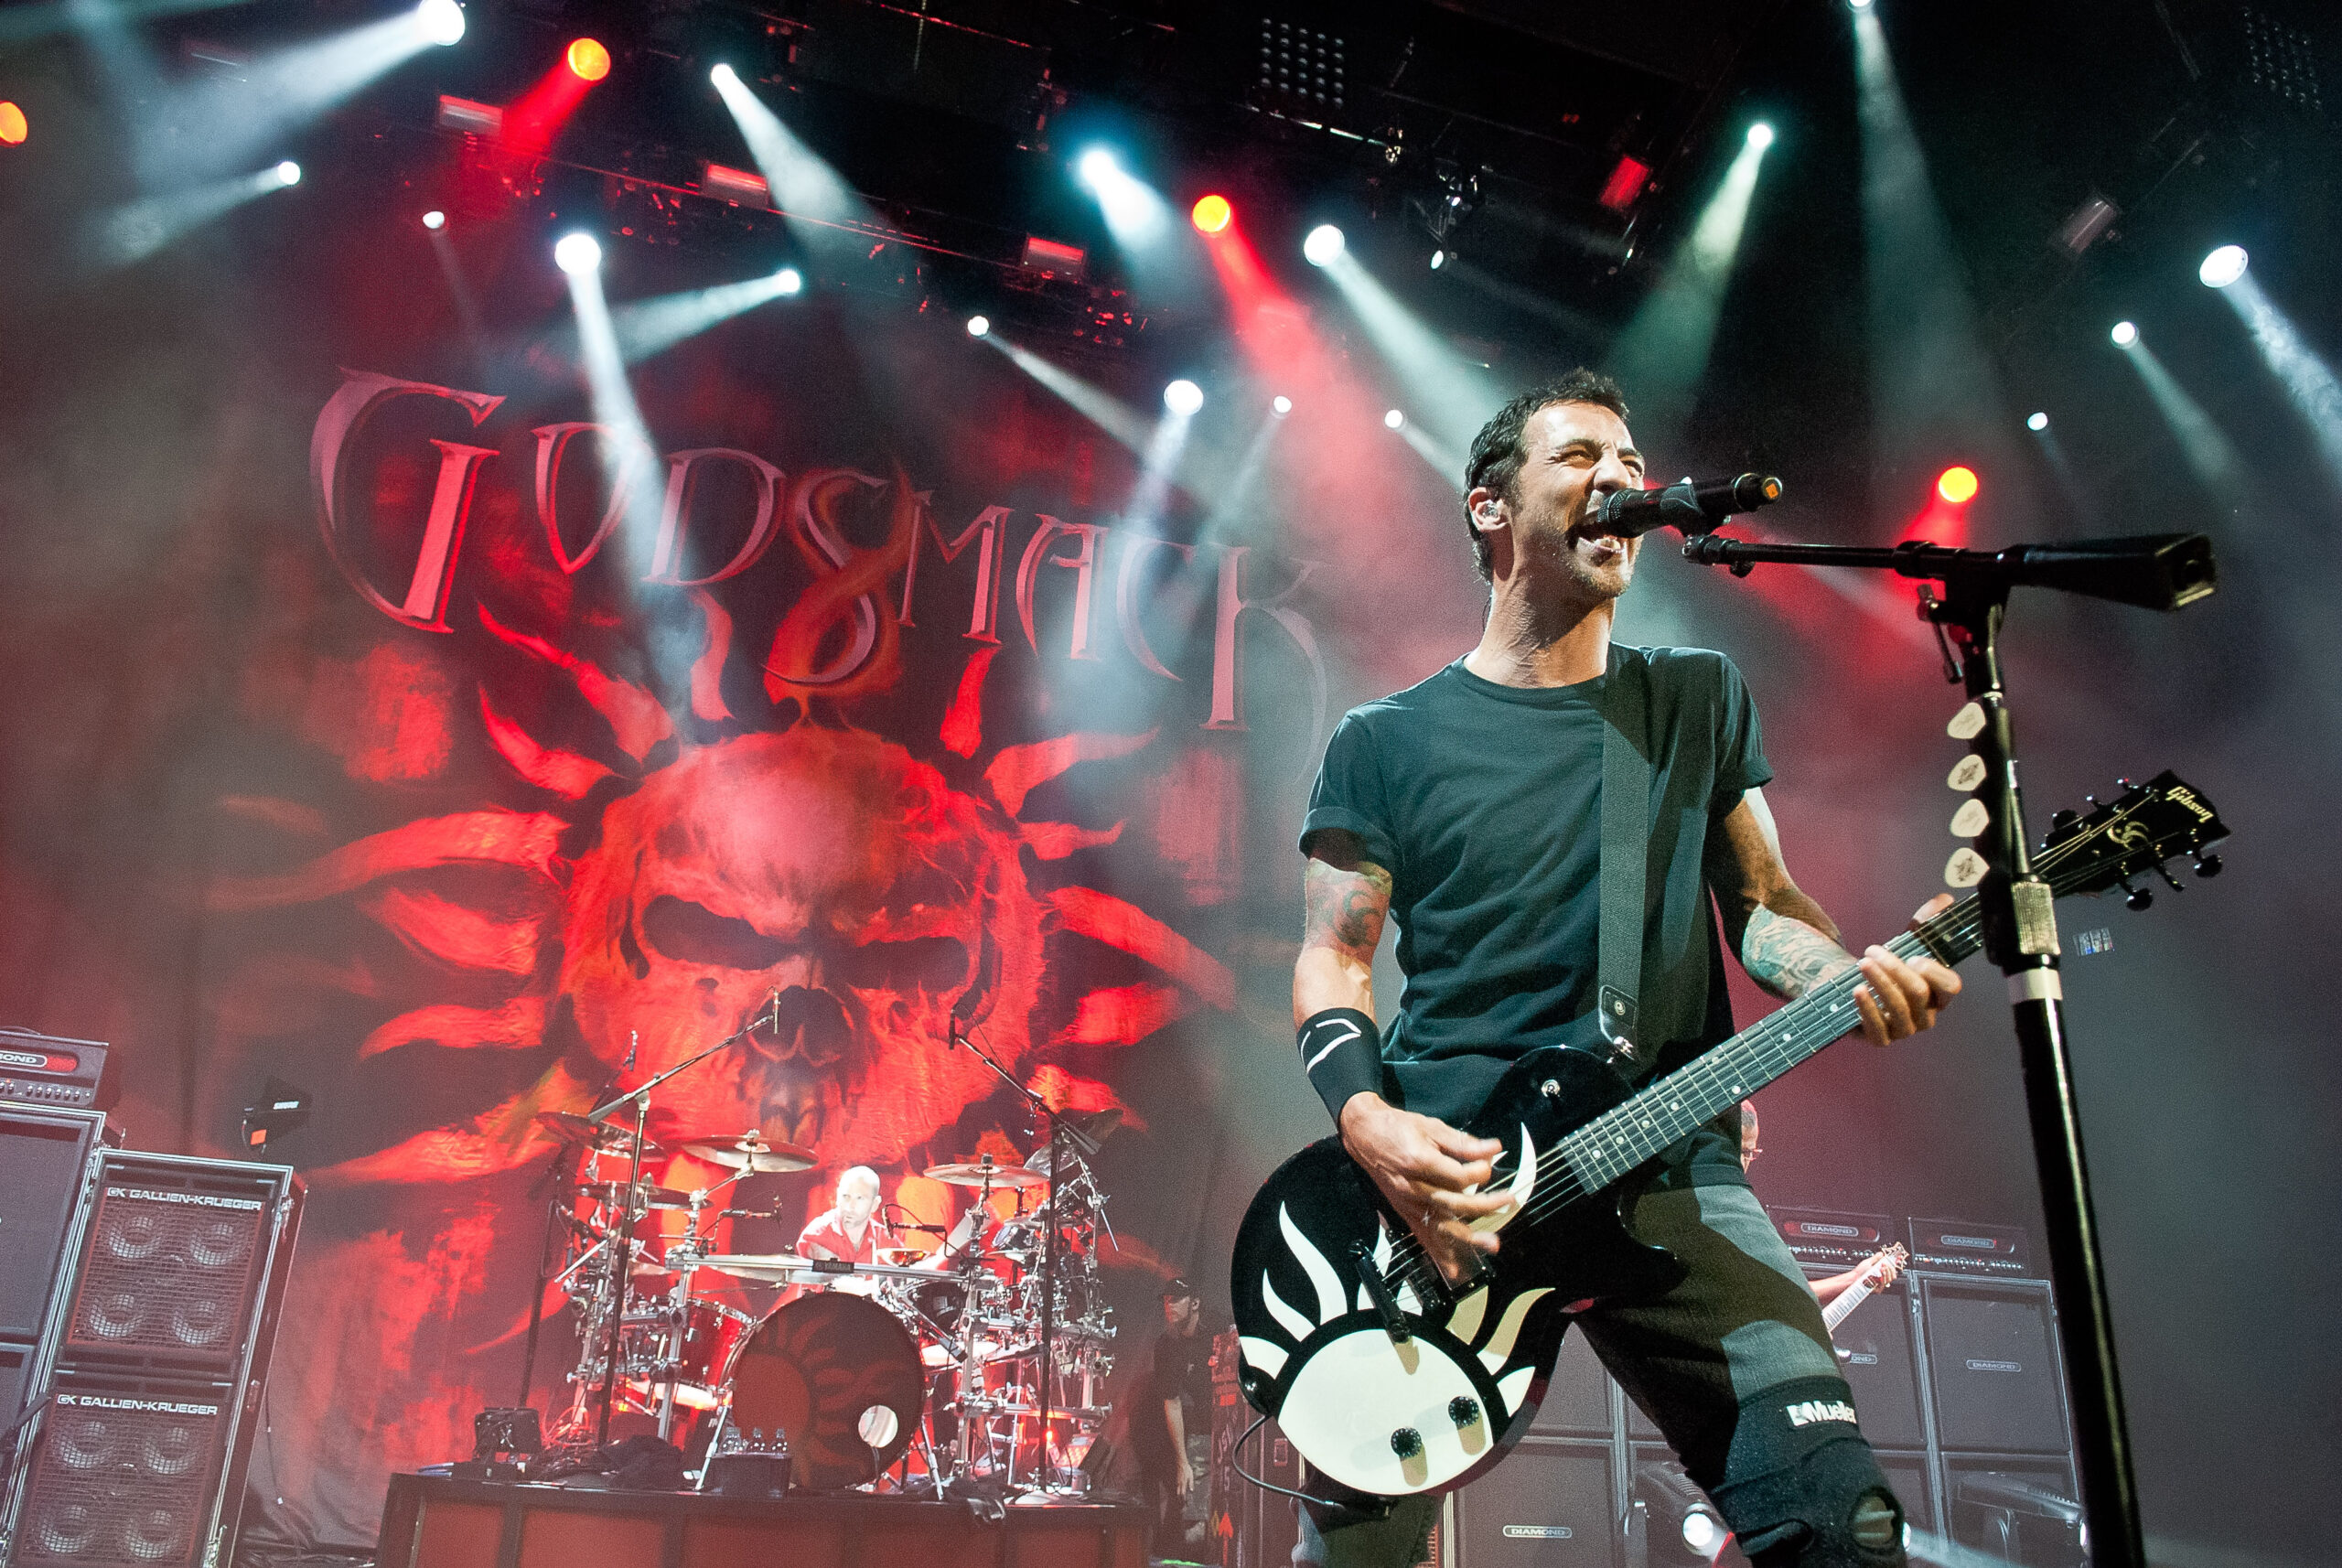 Sully Erna with the band Godsmack performs at the Rockstar Energy Drink Uproar Music Festival on September 15, 2012 in The Woodlands, Texas. Photo © Manuel Nauta